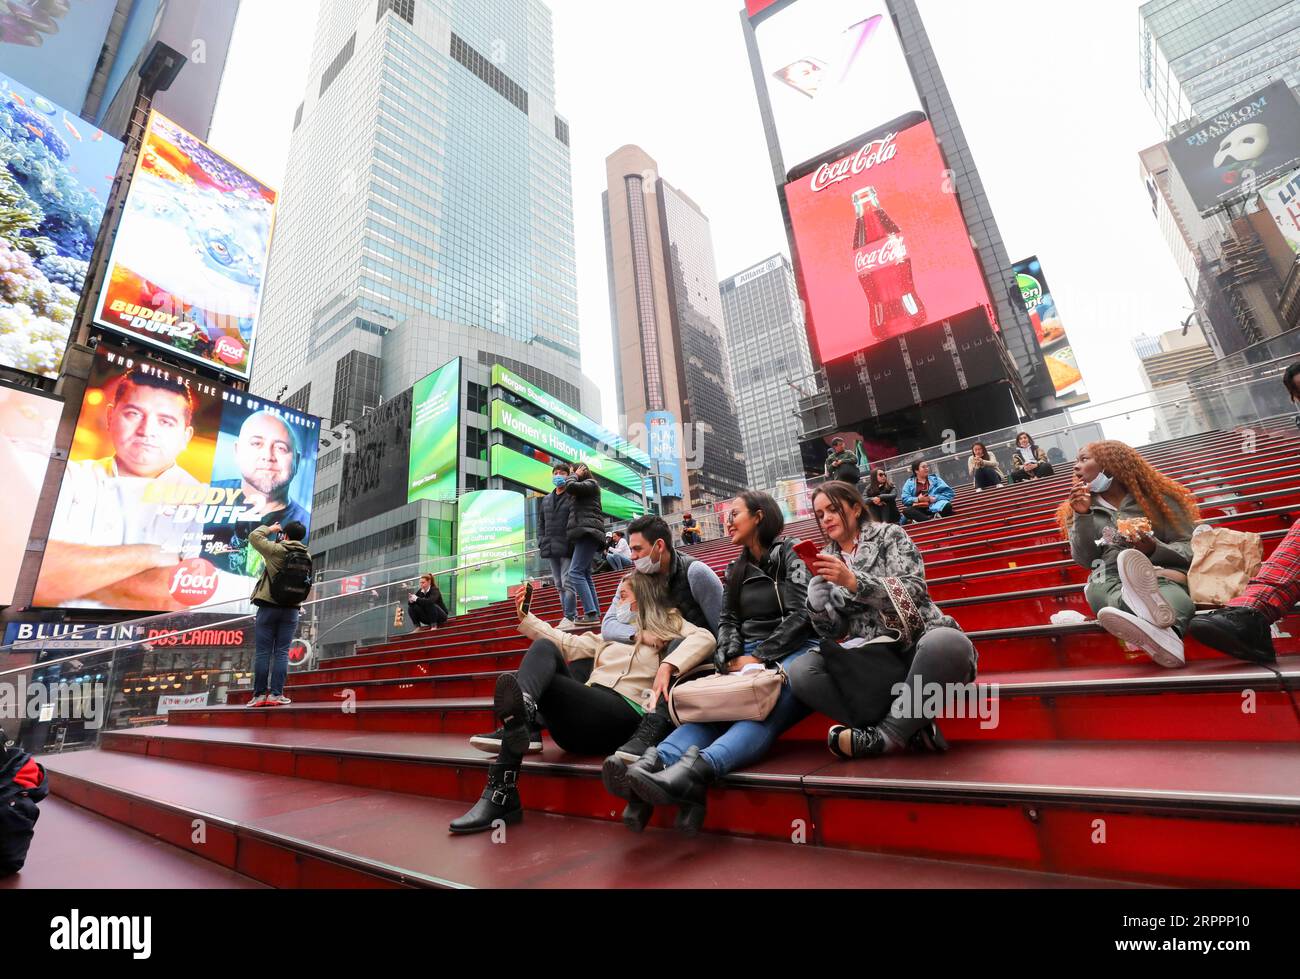 200320 -- NEW YORK, March 20, 2020 -- Tourists wearing facial masks sit on the red stairs on Times Square in New York City, the United States, March 19, 2020. The number of COVID-19 cases in the United States topped 13,000 as of 5:30 p.m. 2130 GMT on Thursday, according to the Center for Systems Science and Engineering CSSE at Johns Hopkins University. The fresh figure reached 13,060 with 175 deaths.  U.S.-COVID-19 CASES WangxYing PUBLICATIONxNOTxINxCHN Stock Photo